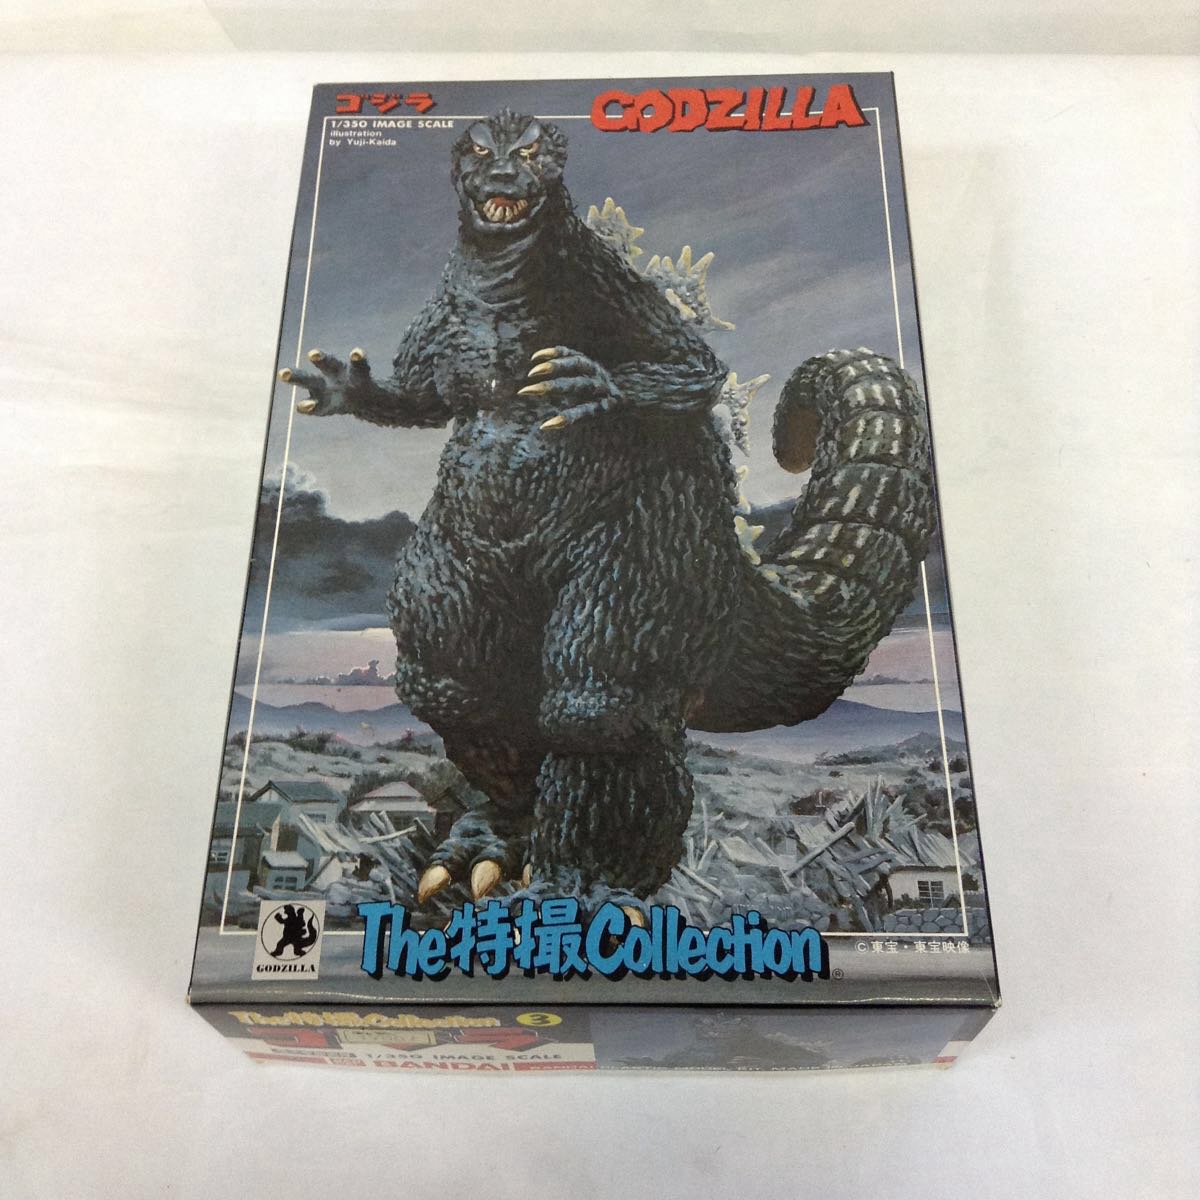 [ used ] Godzilla special effects collection 3 Mothra larva attaching 1/350 plastic model 